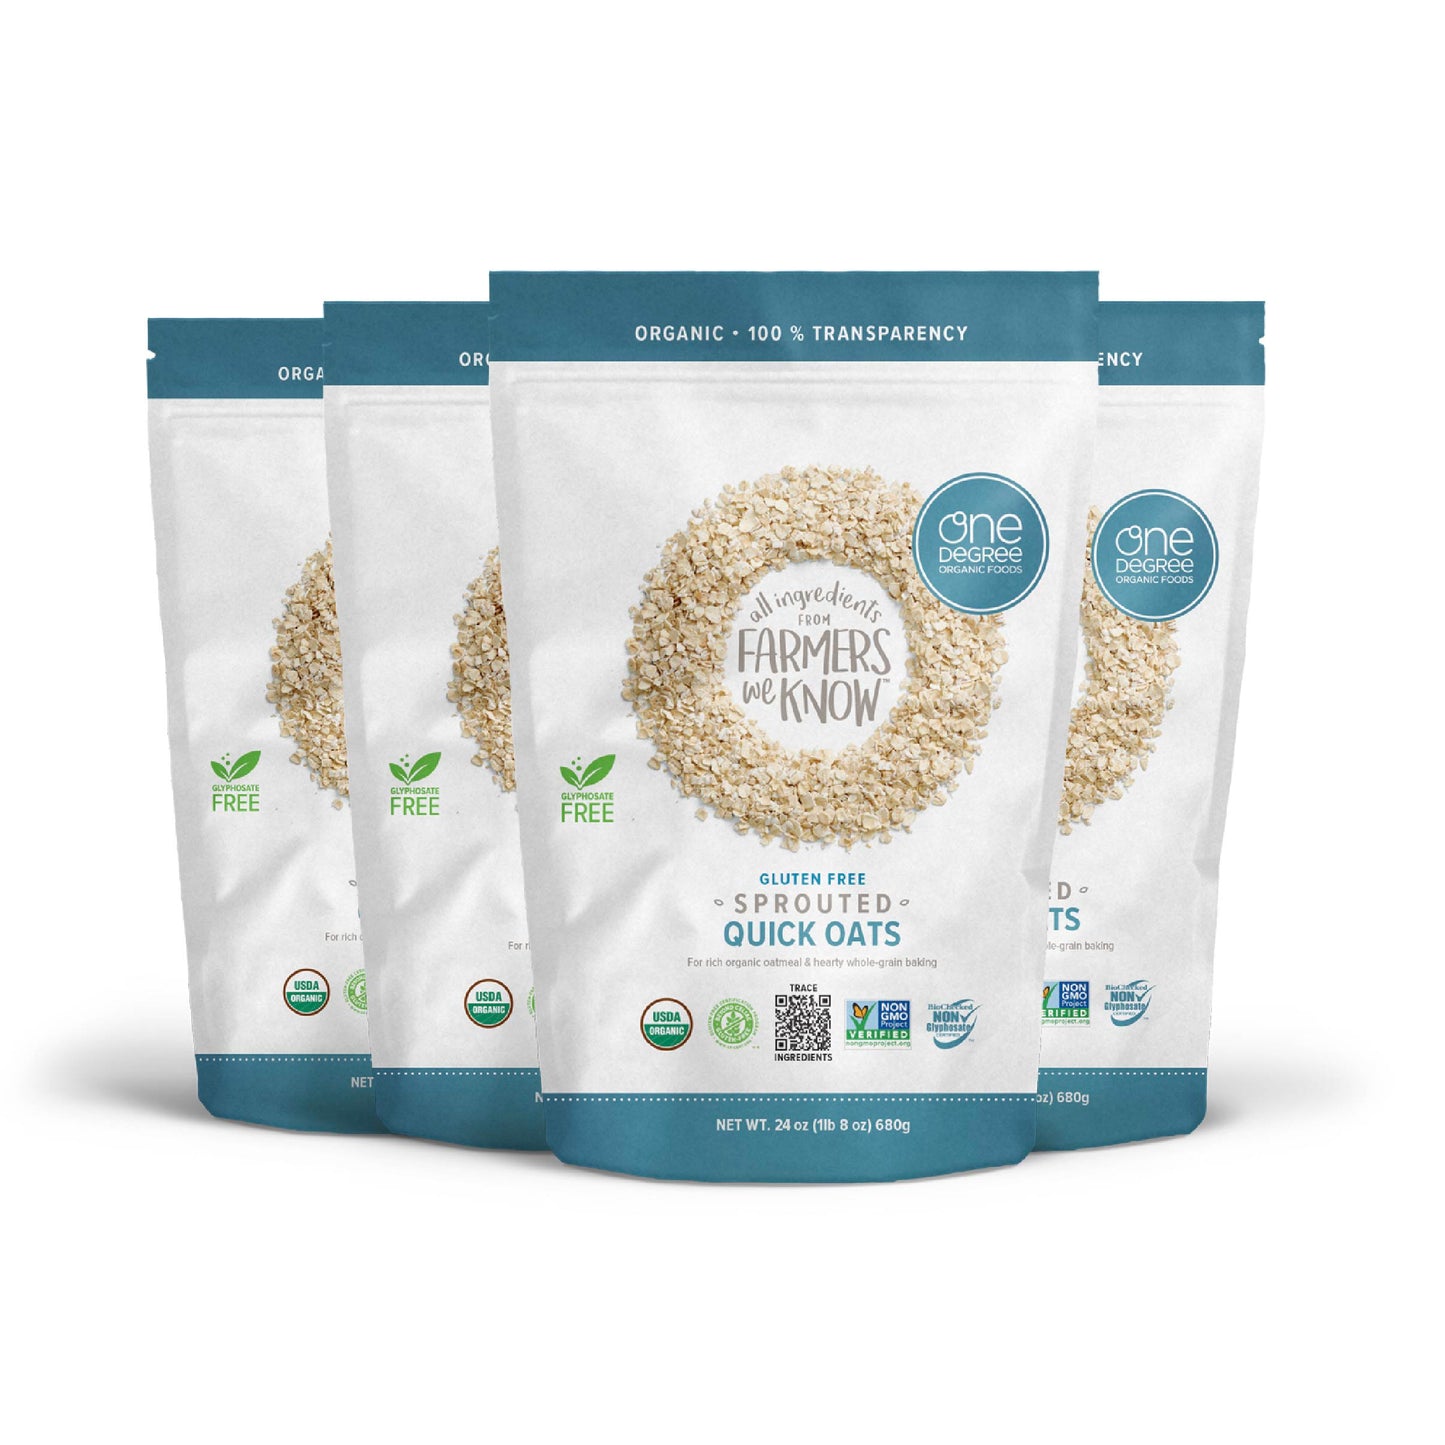 Organic Sprouted Quick Oats, 24 oz.